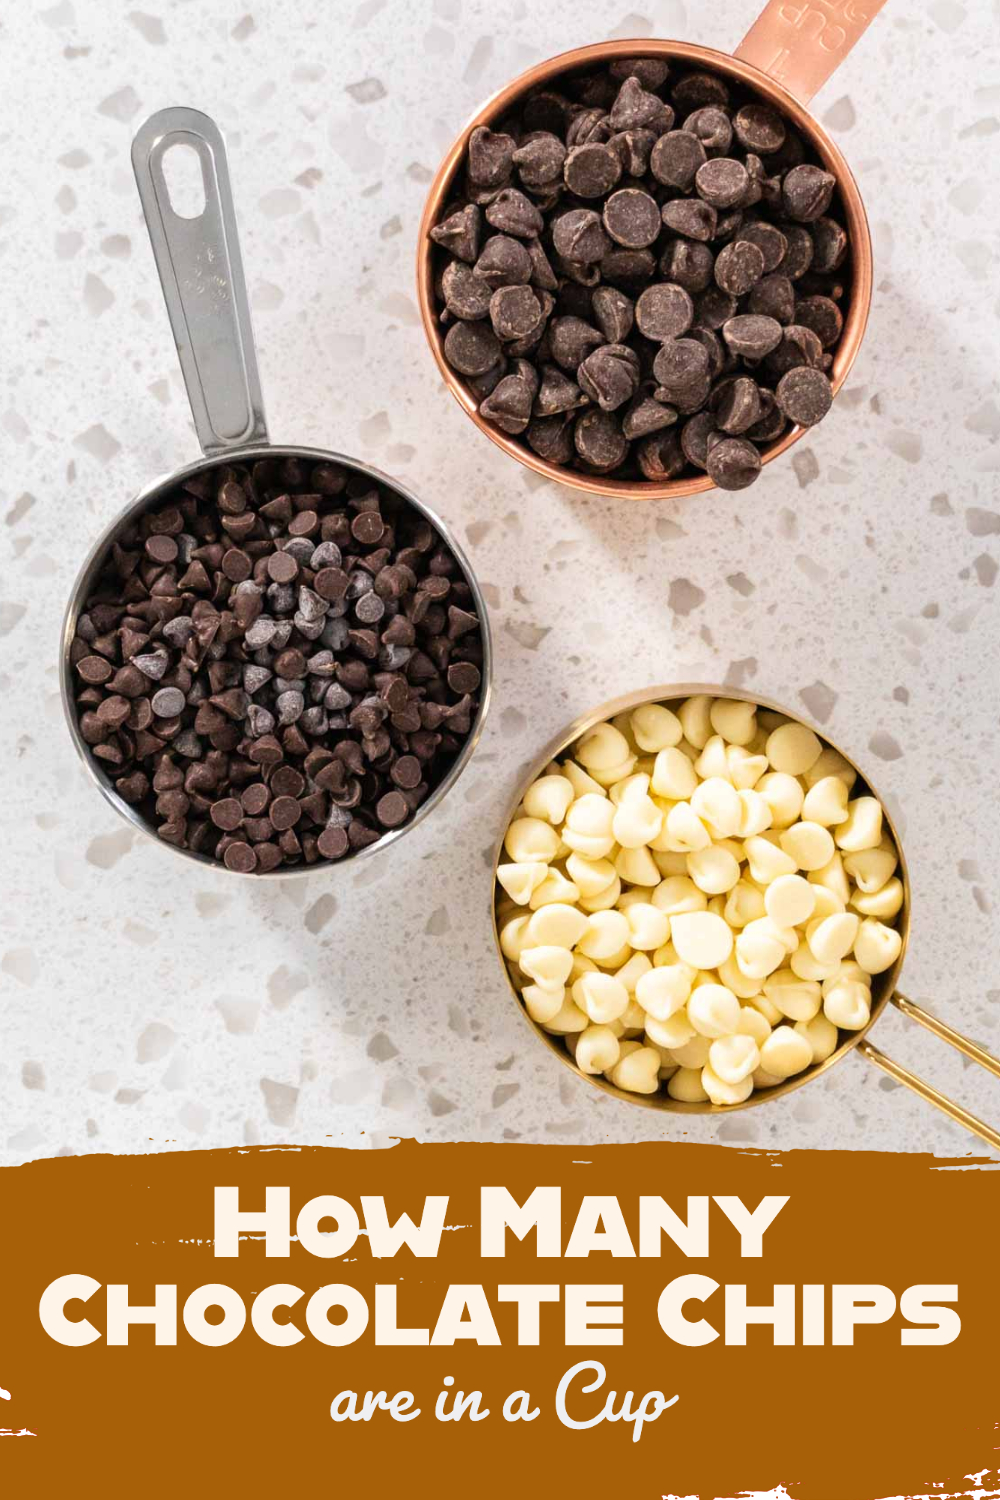 How Many Chocolate Chips are in a Cup